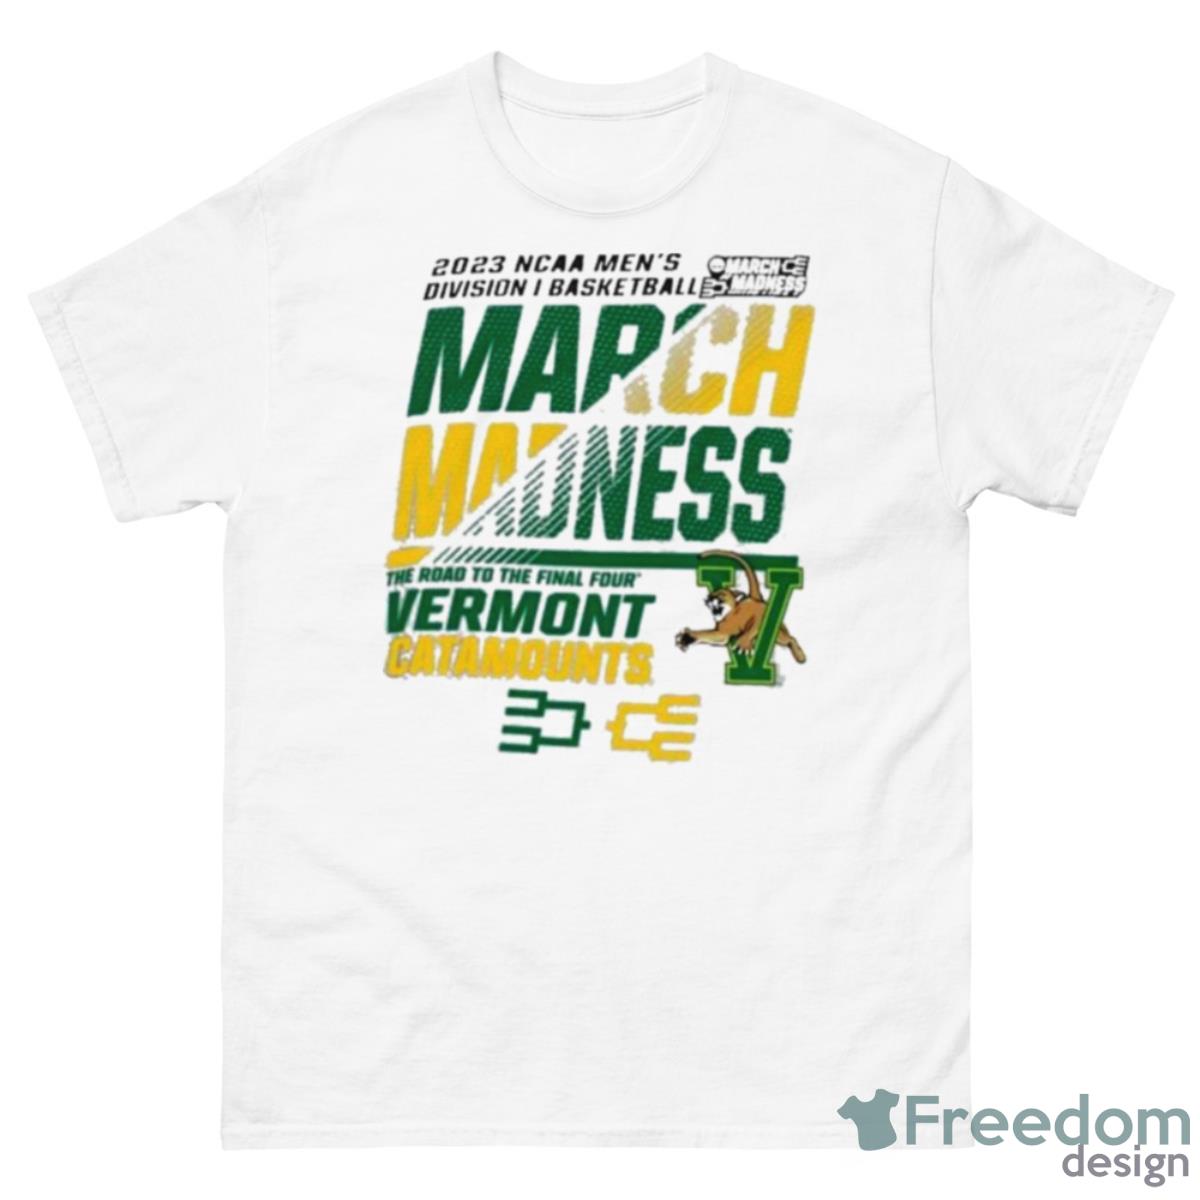 Vermont Men’s Basketball 2023 NCAA March Madness The Road To Final Four Shirt - 500 Men’s Classic Tee Gildan